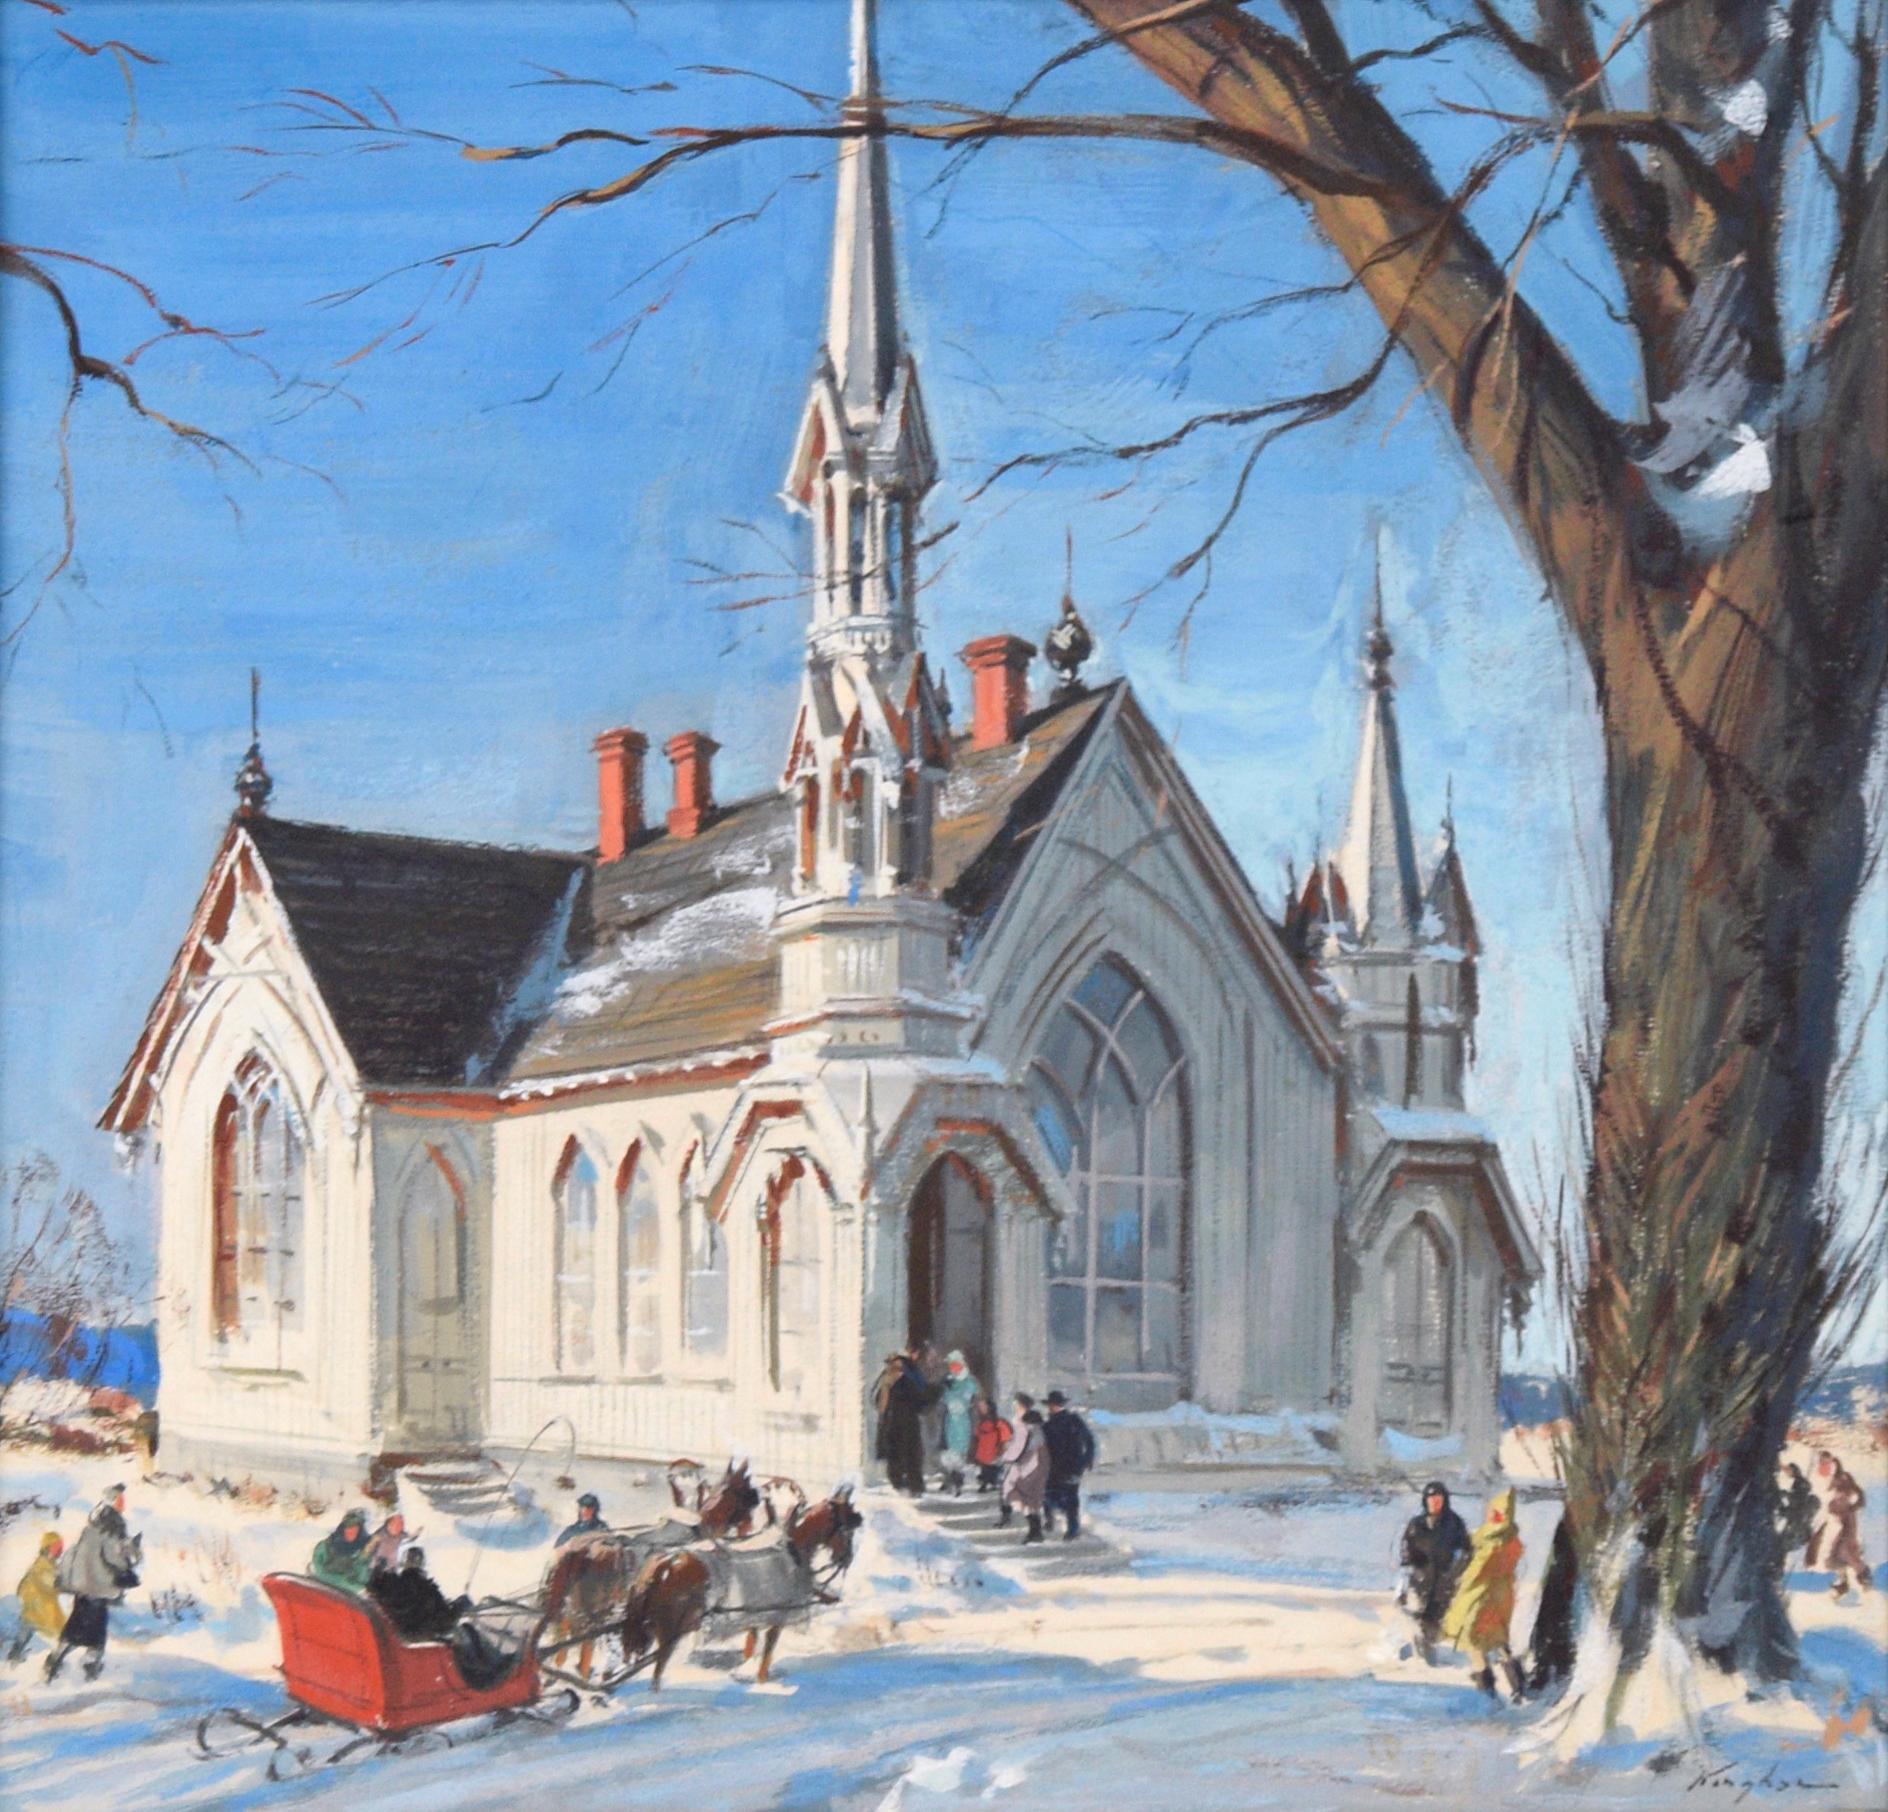 Arriving at Church in Winter – figurative, realistische Illustration – Painting von Charles Kinghan